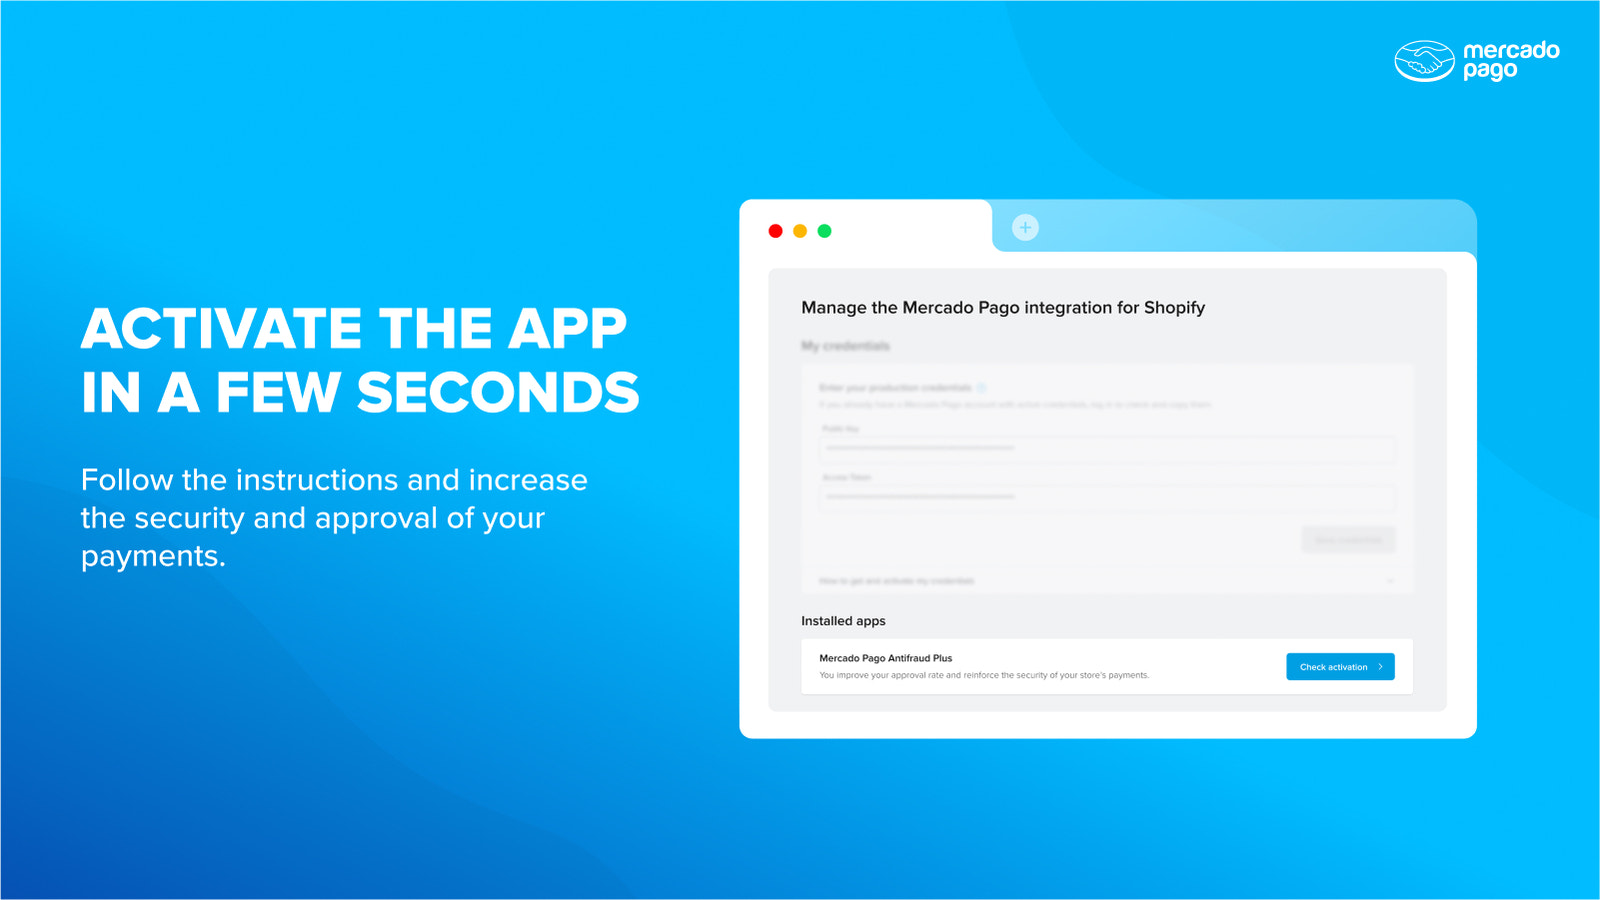 Activate the app in a few seconds.